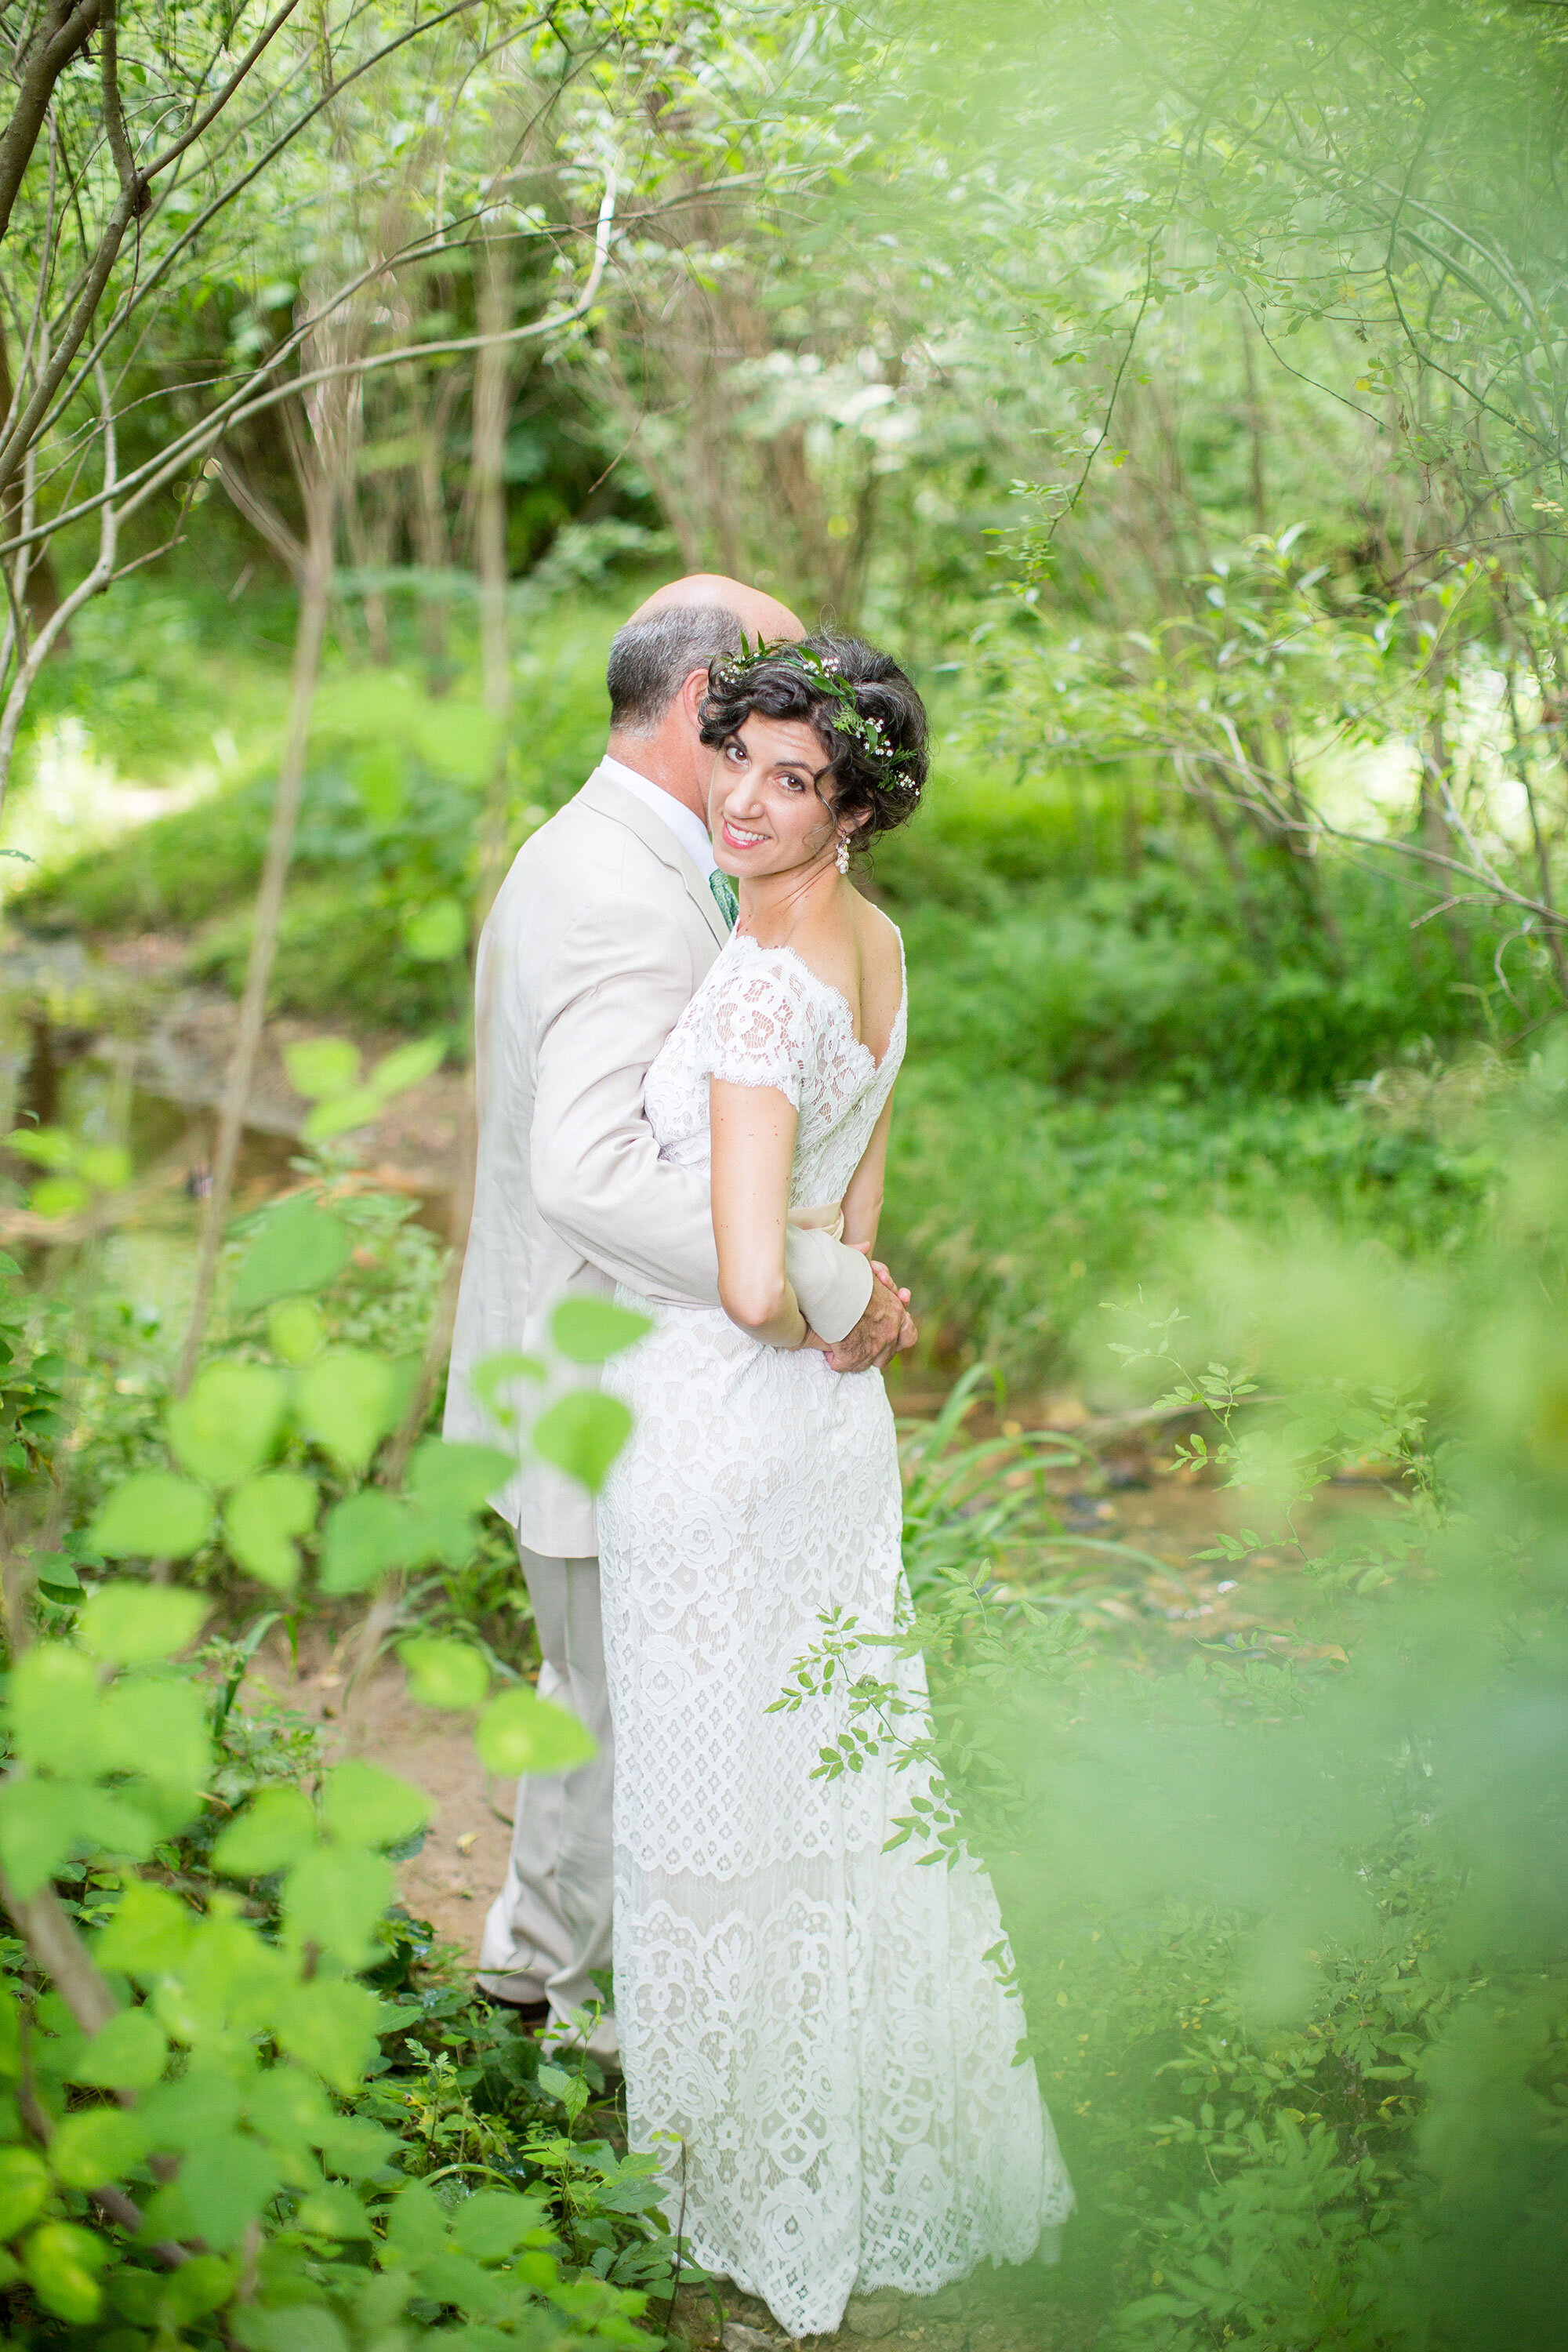  Bride and groom embracing in the forest, bride looking at the camera wearing custom handmade earrings 